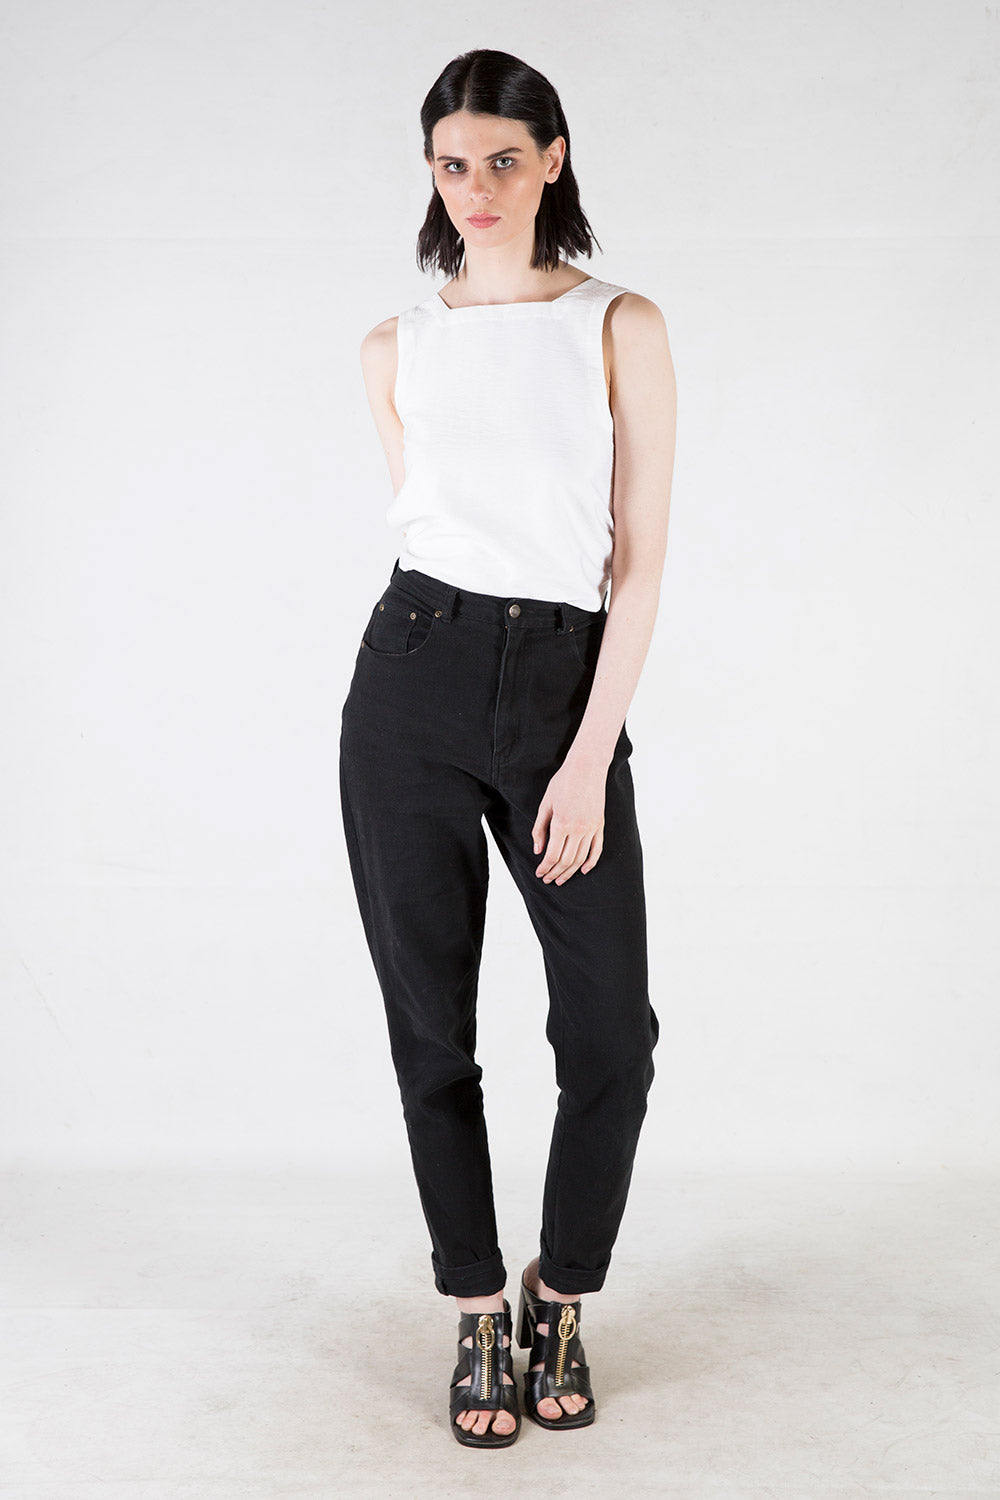 Henry Tie Top | Young + Resolute | Annah Stretton